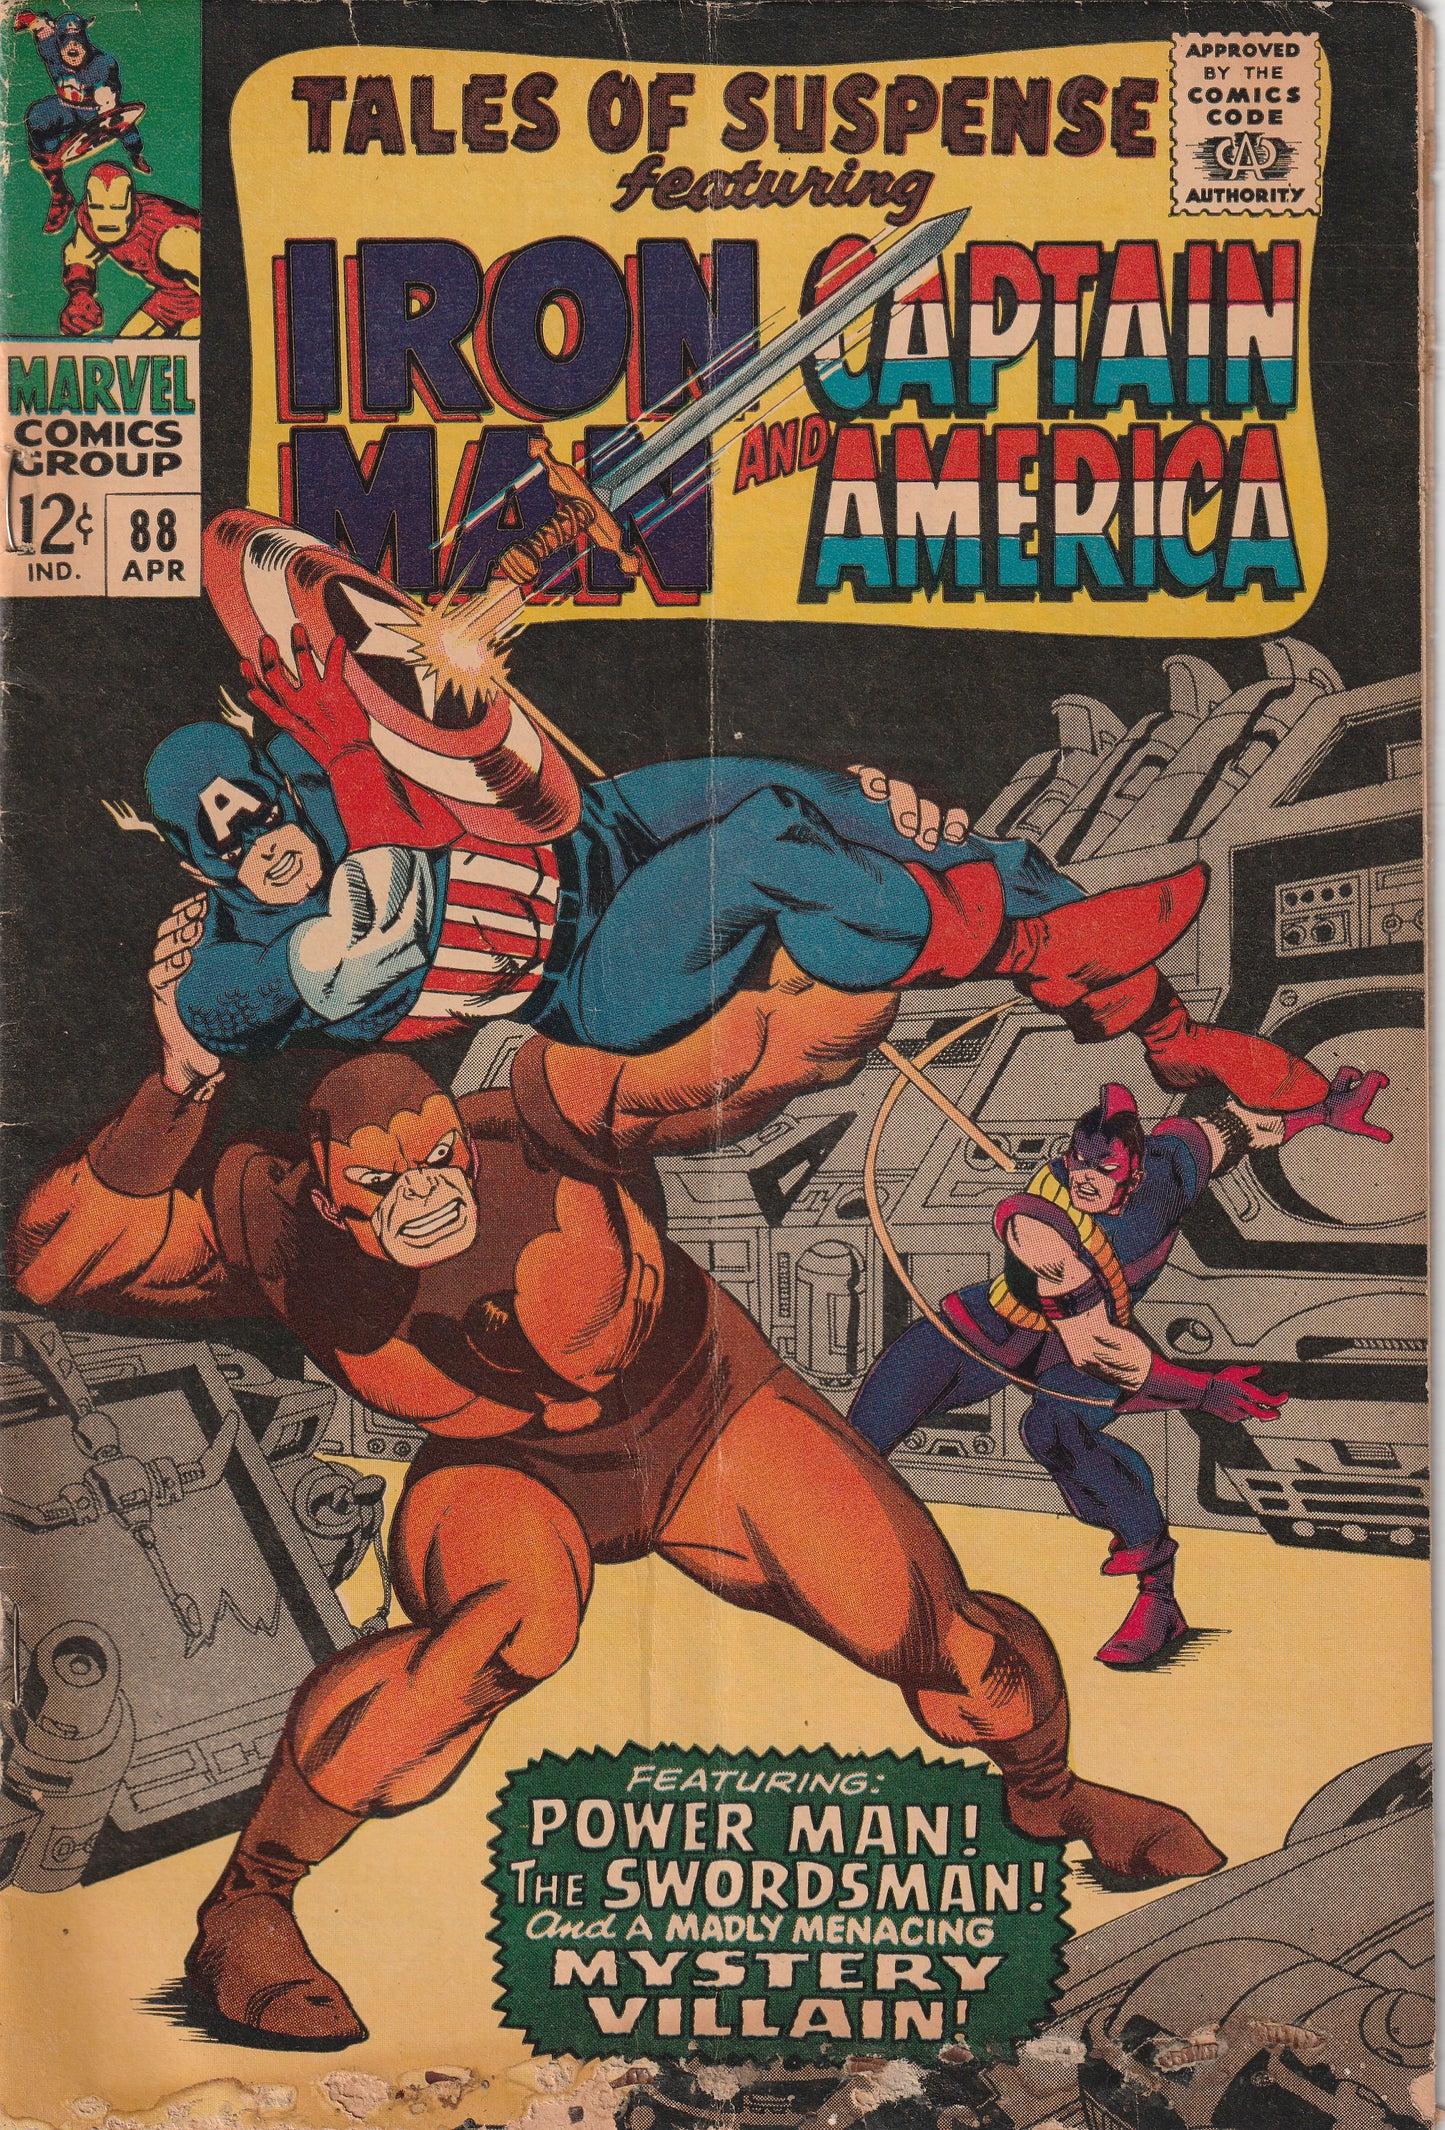 Tales of Suspense #88 (1967) - Featuring Iron Man and Captain America